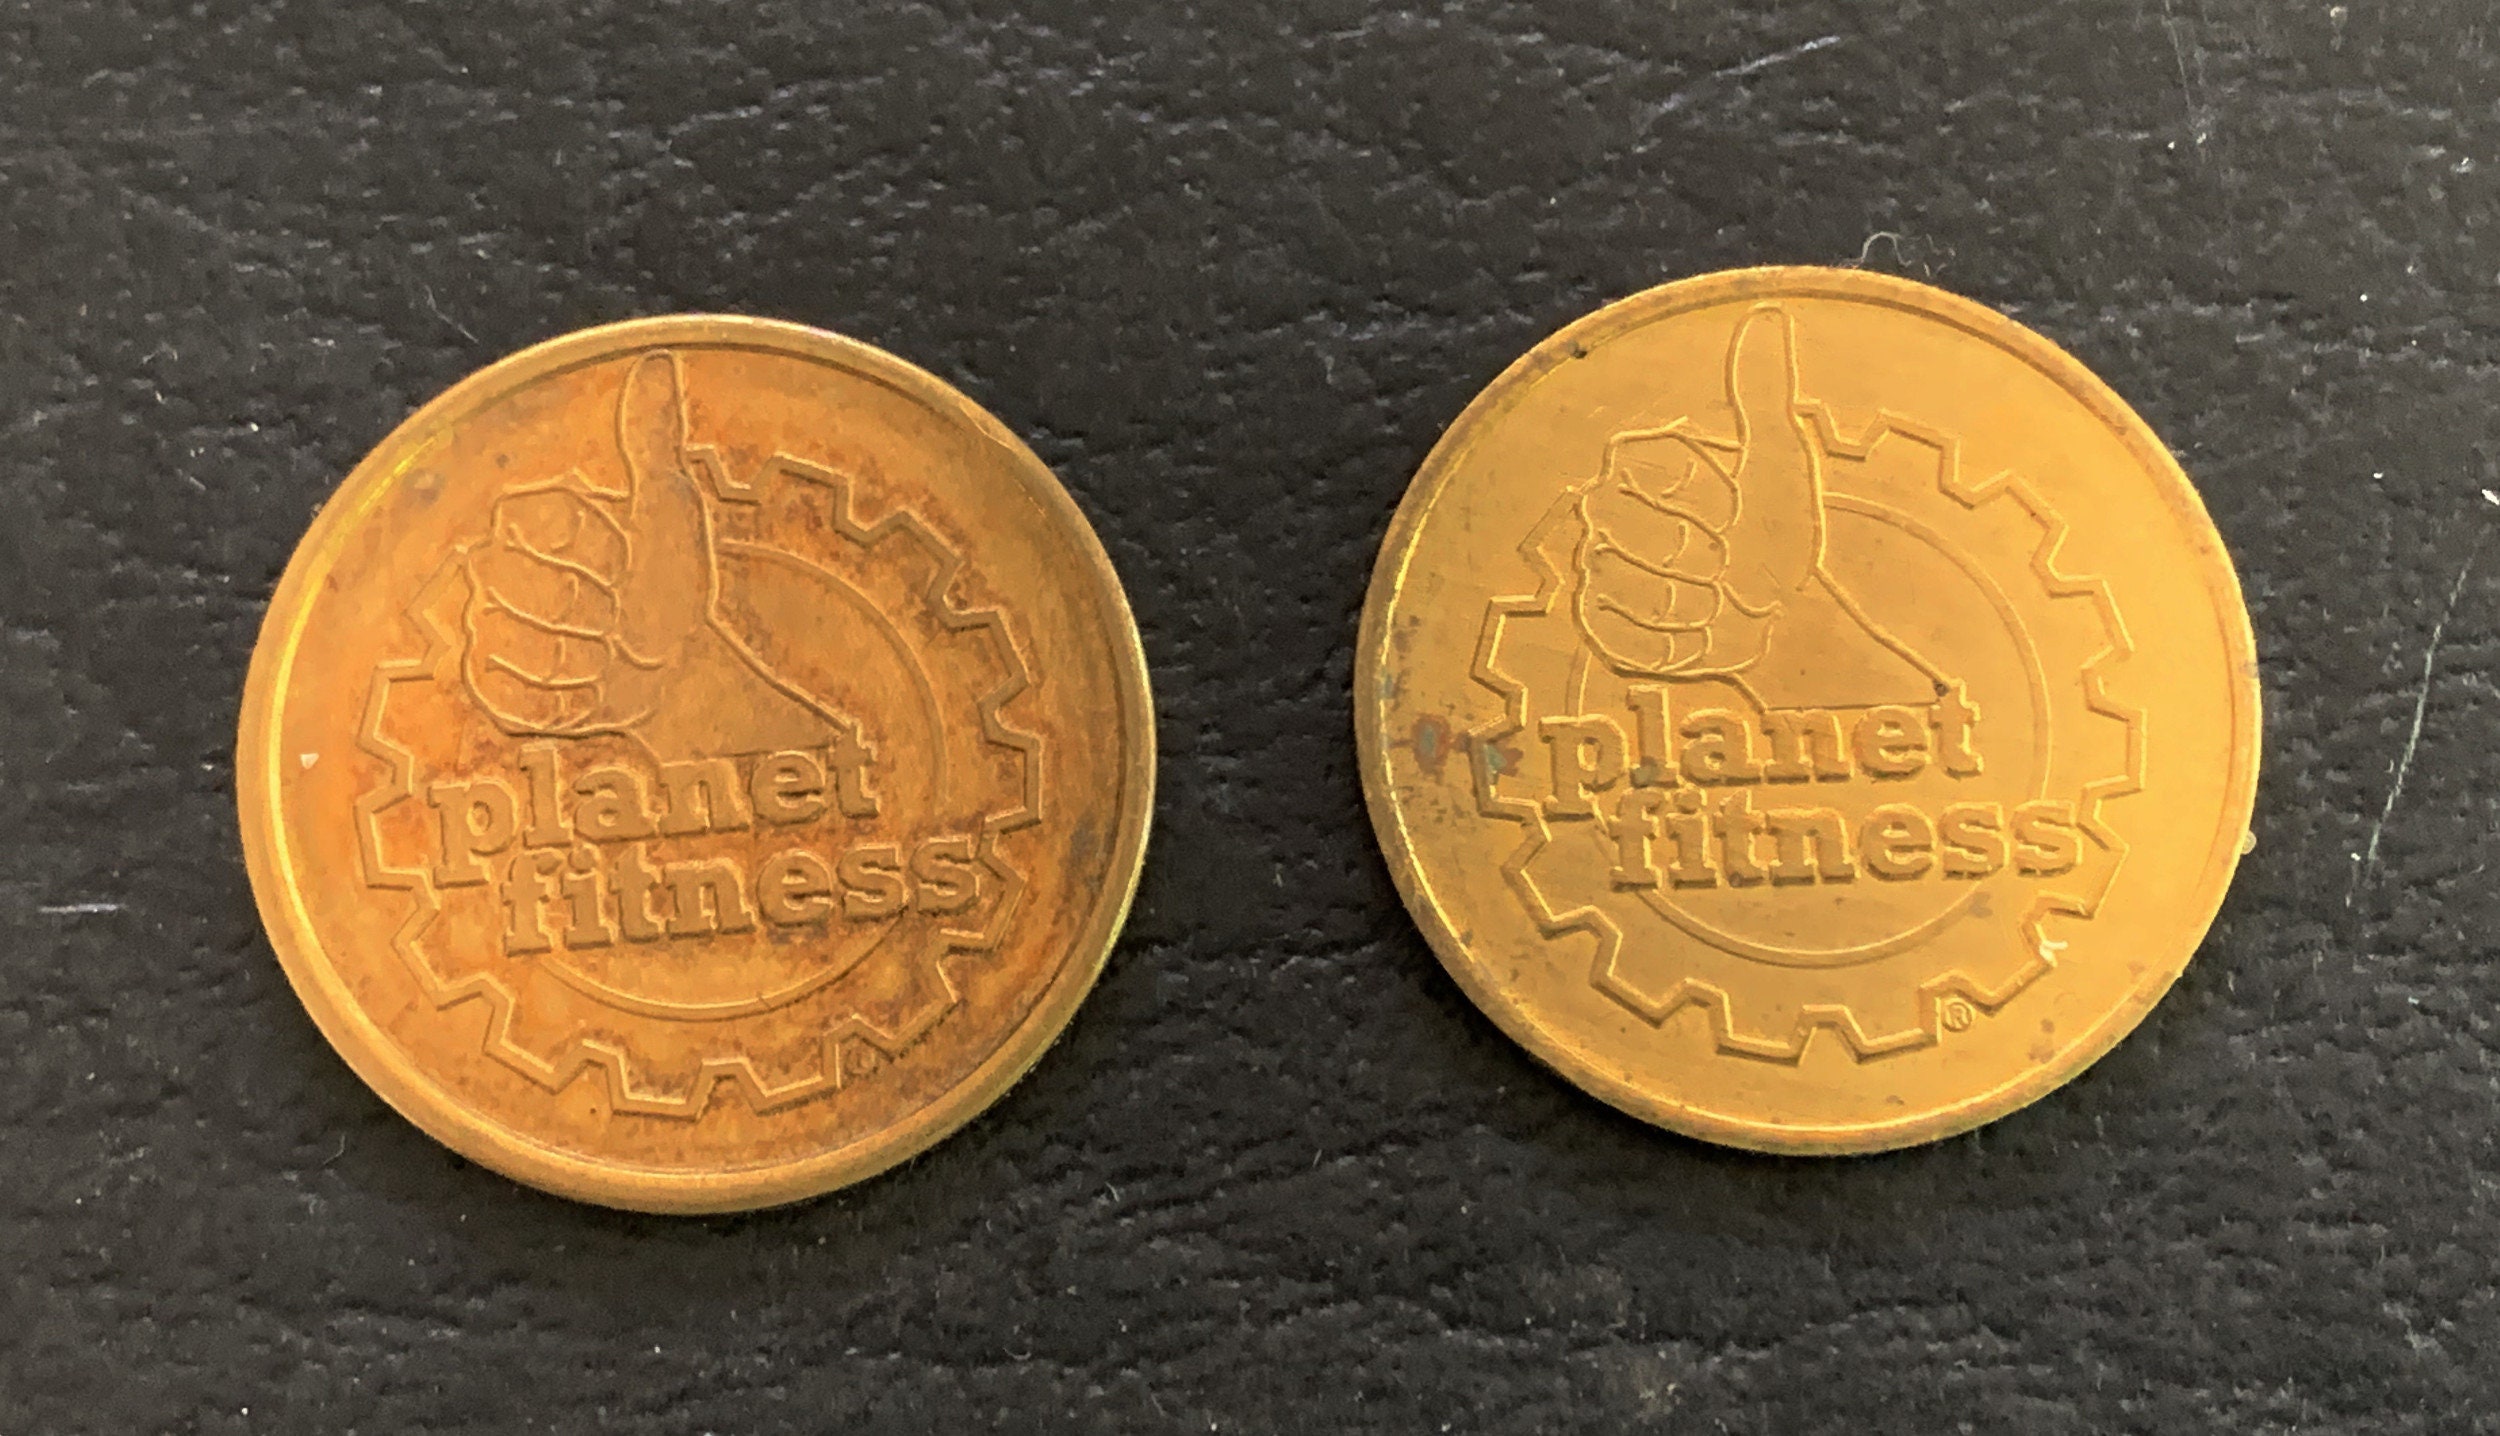 Planet Fitness Massage Coins Two Tokens Good for One Visit Each HT538 -   Canada